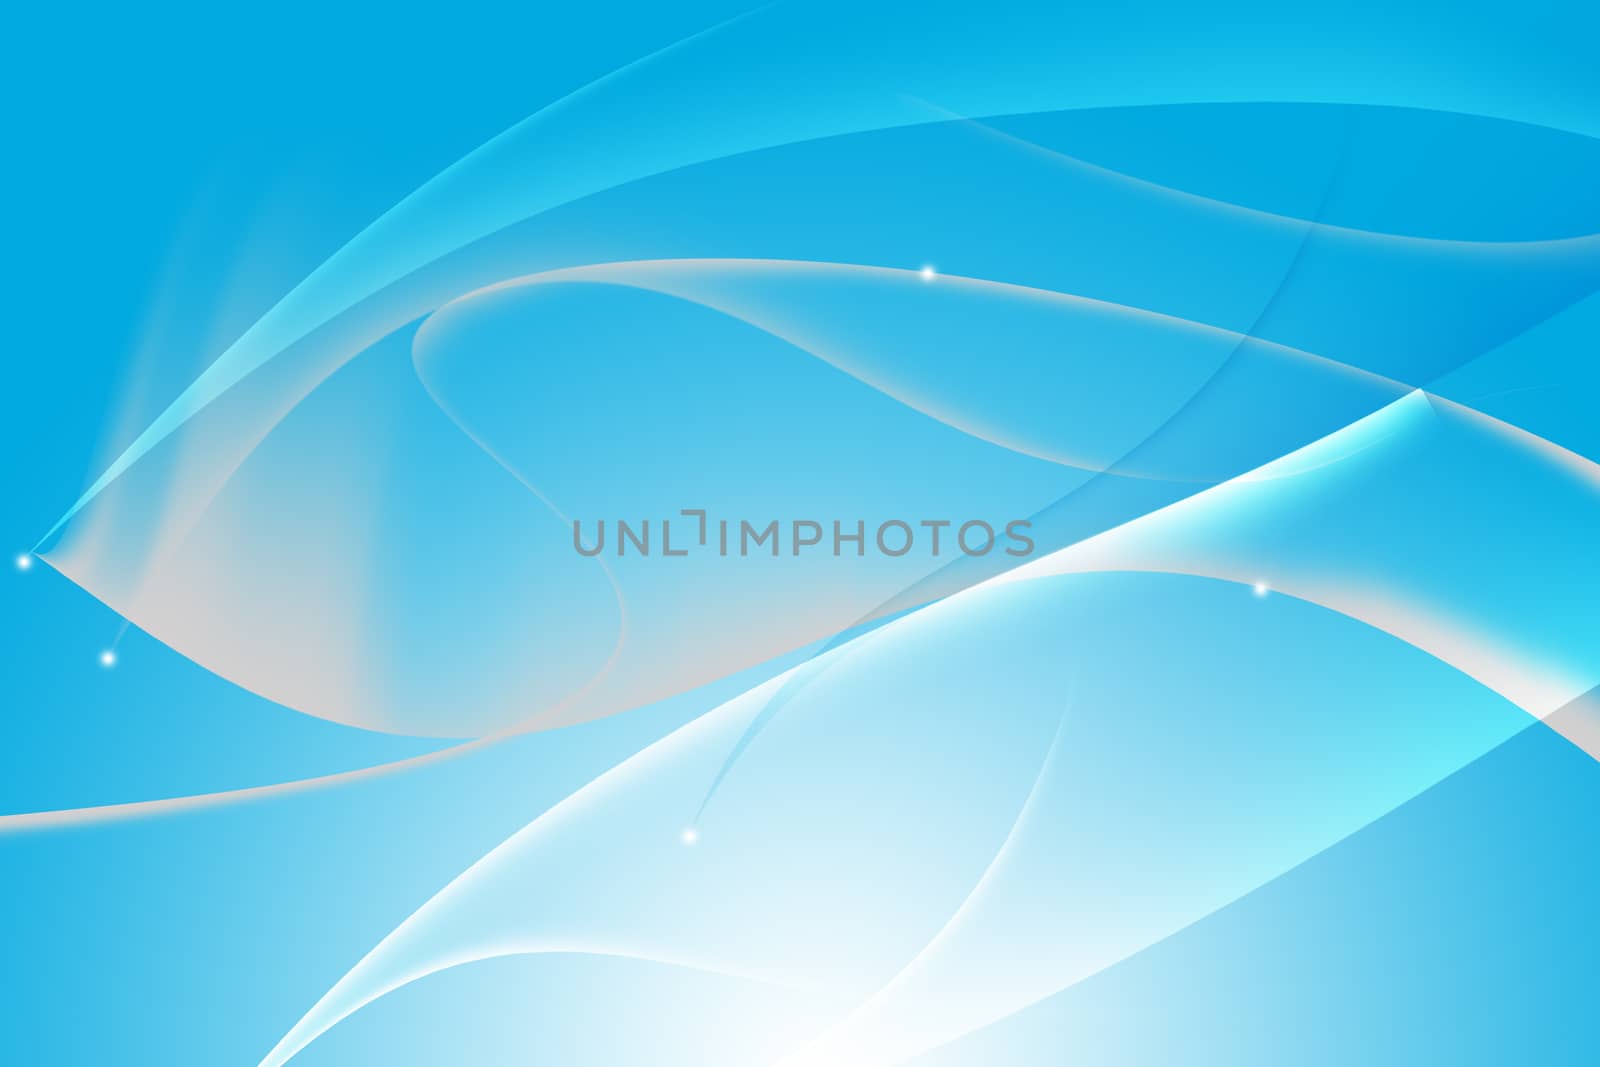 Blue abstract design with wavy and curve background